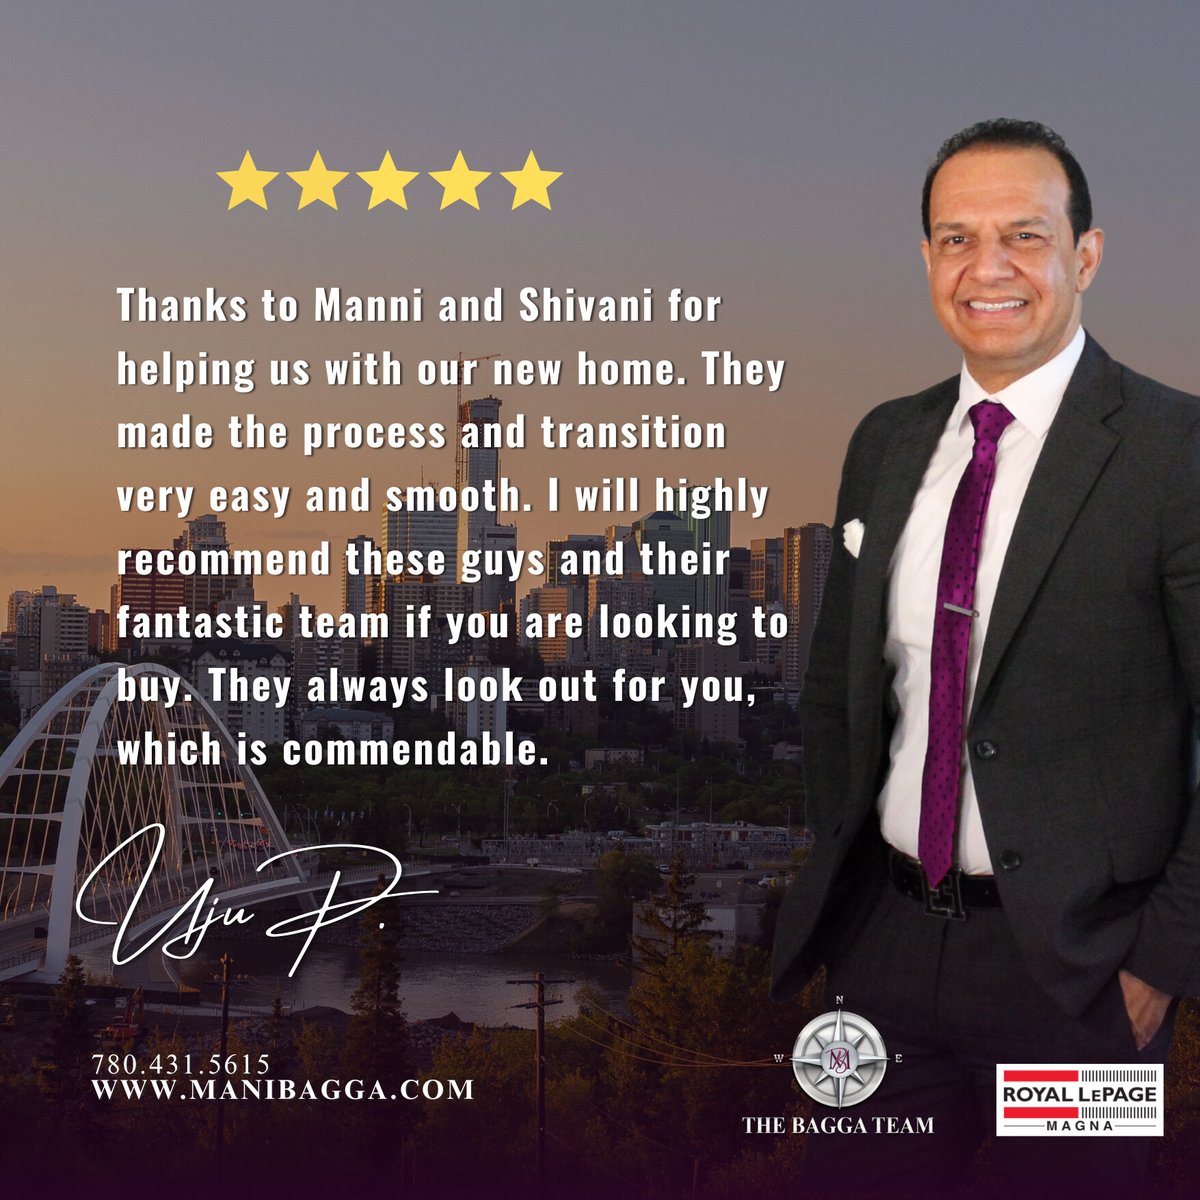 Thrilled to share this incredible review from my amazing clients! 

780.431.5615 | ManiBagga.com 

#BaggaBeginnings #NewBeginnings #YEGBeginnings  #TheBaggaTeam #RoyalLePageMagna
#ProudTeam #KeepItUp #Grateful #ClientLove